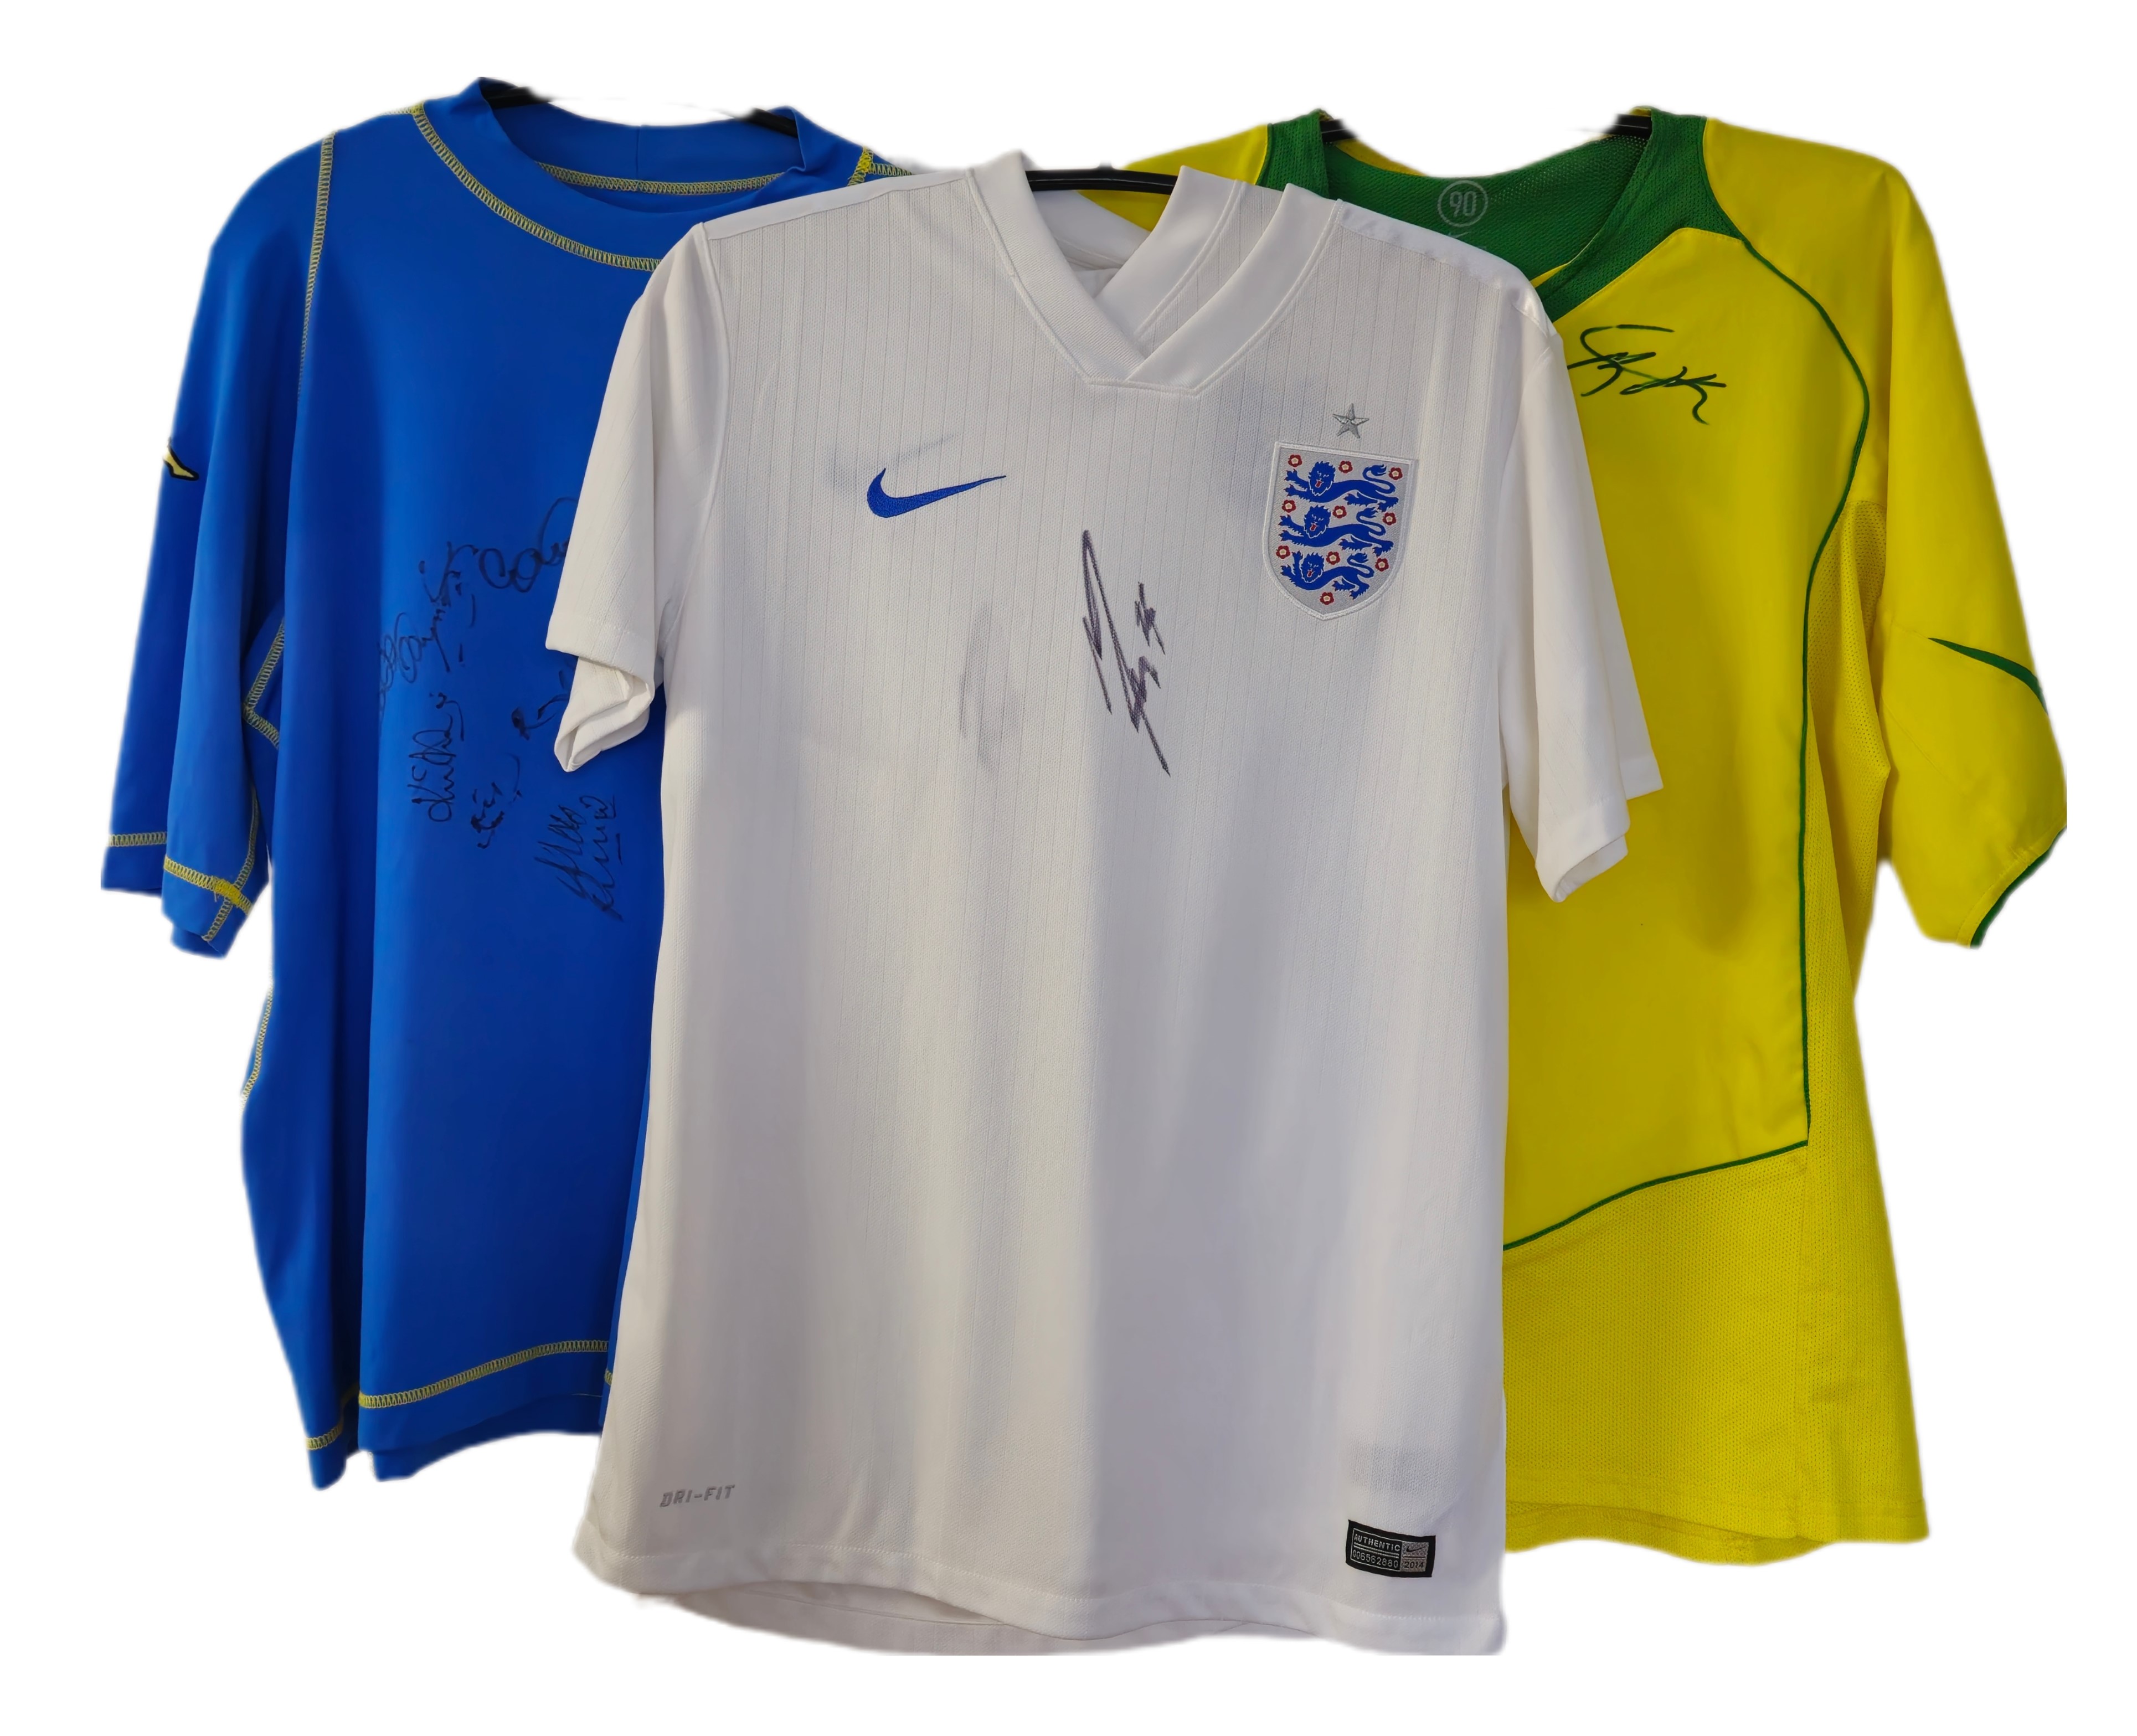 Football International Shirt collection of 3 signed shirts. England, Brazil and Wales. Good